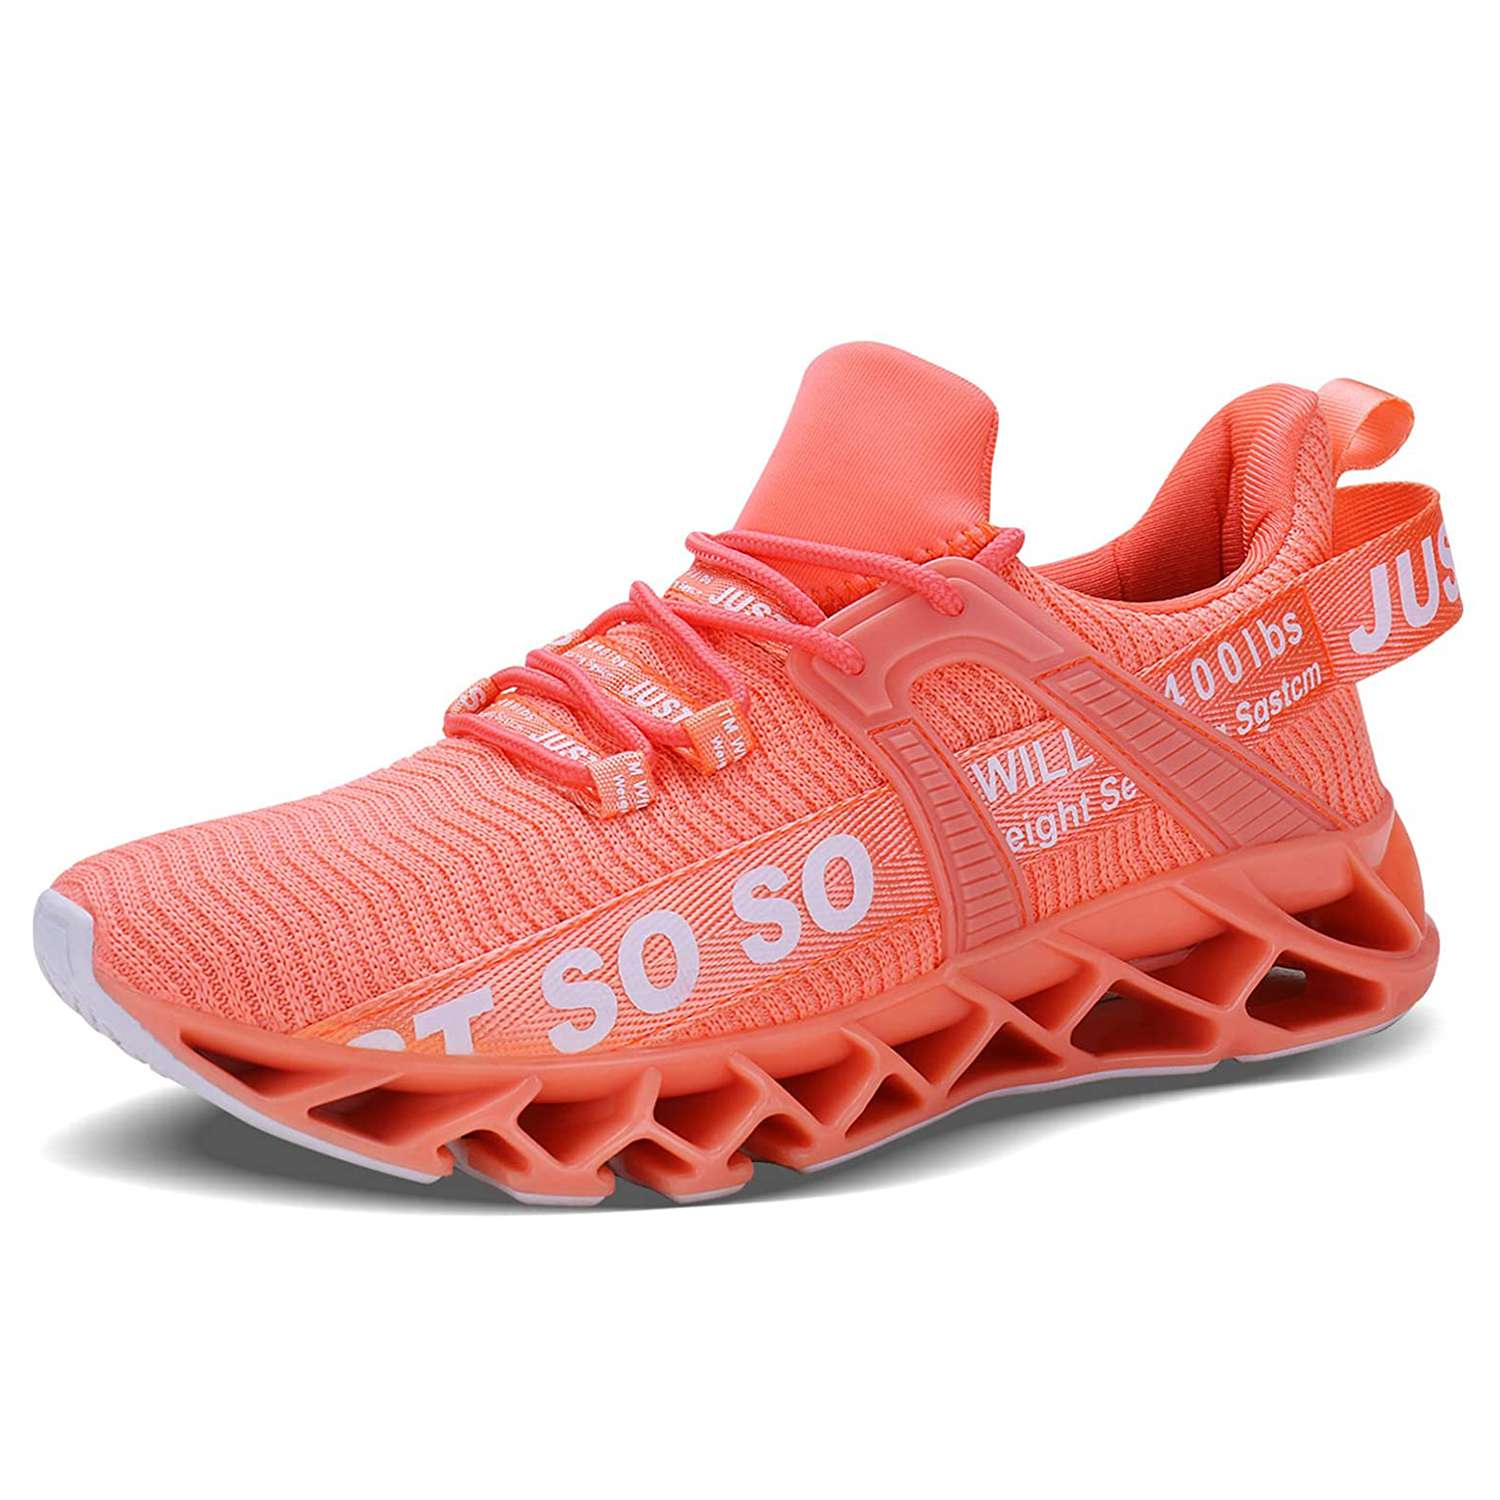 The Umyogo Running Sneakers Start At 35 At Amazon People Com